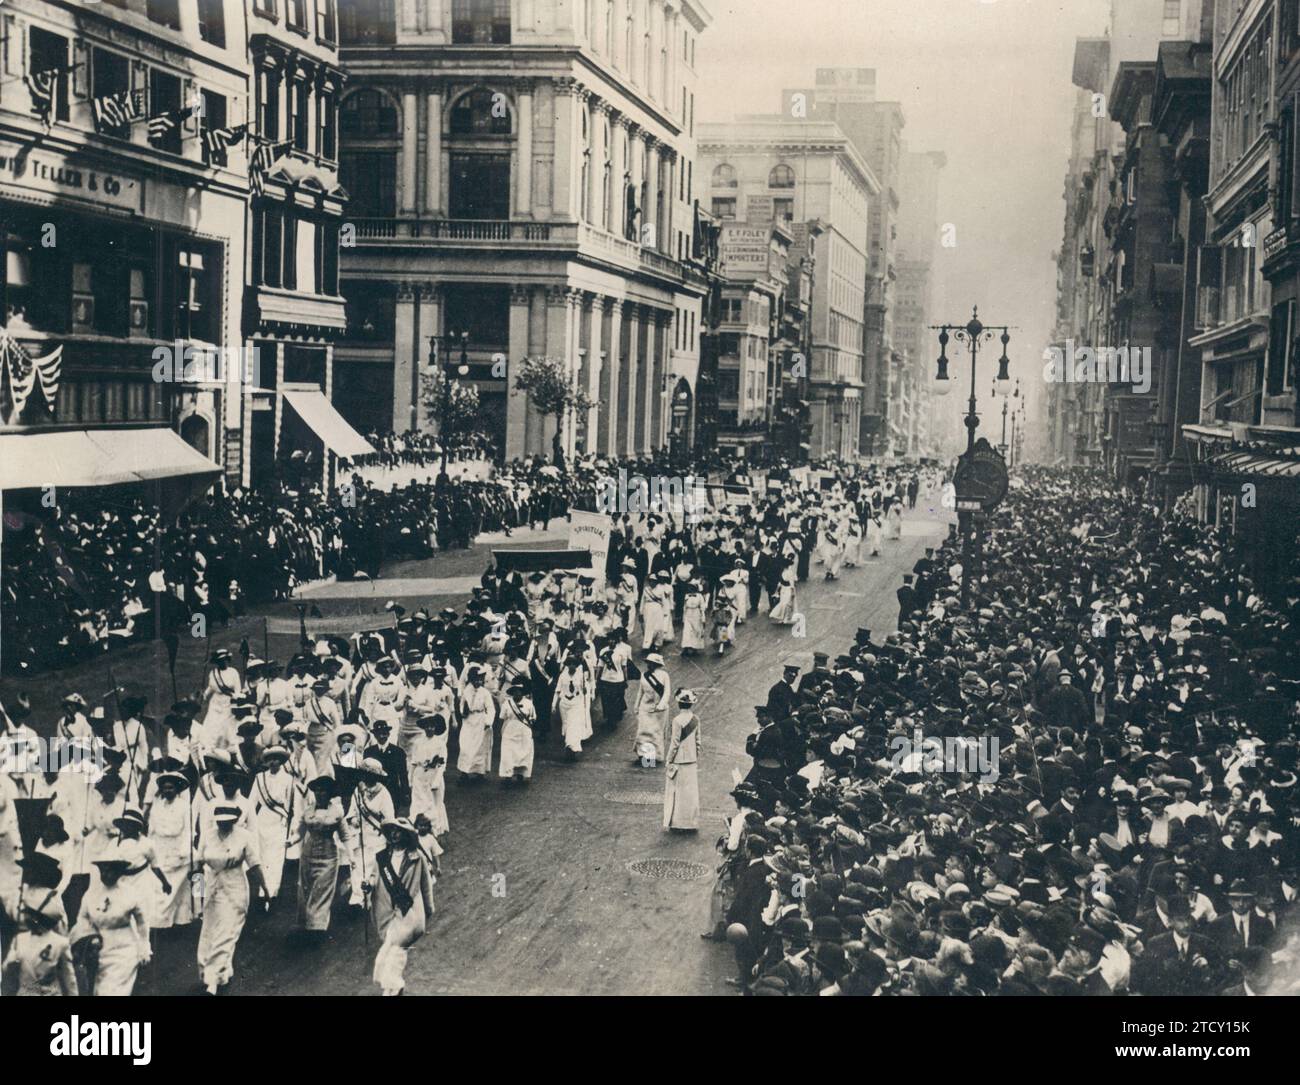 New York City (New York, United States), May 1913. The feminist movement in the United States: appearance of the streets of New York as a suffragette demonstration passes by. Credit: Album / Archivo ABC / Charles Trampus Stock Photo